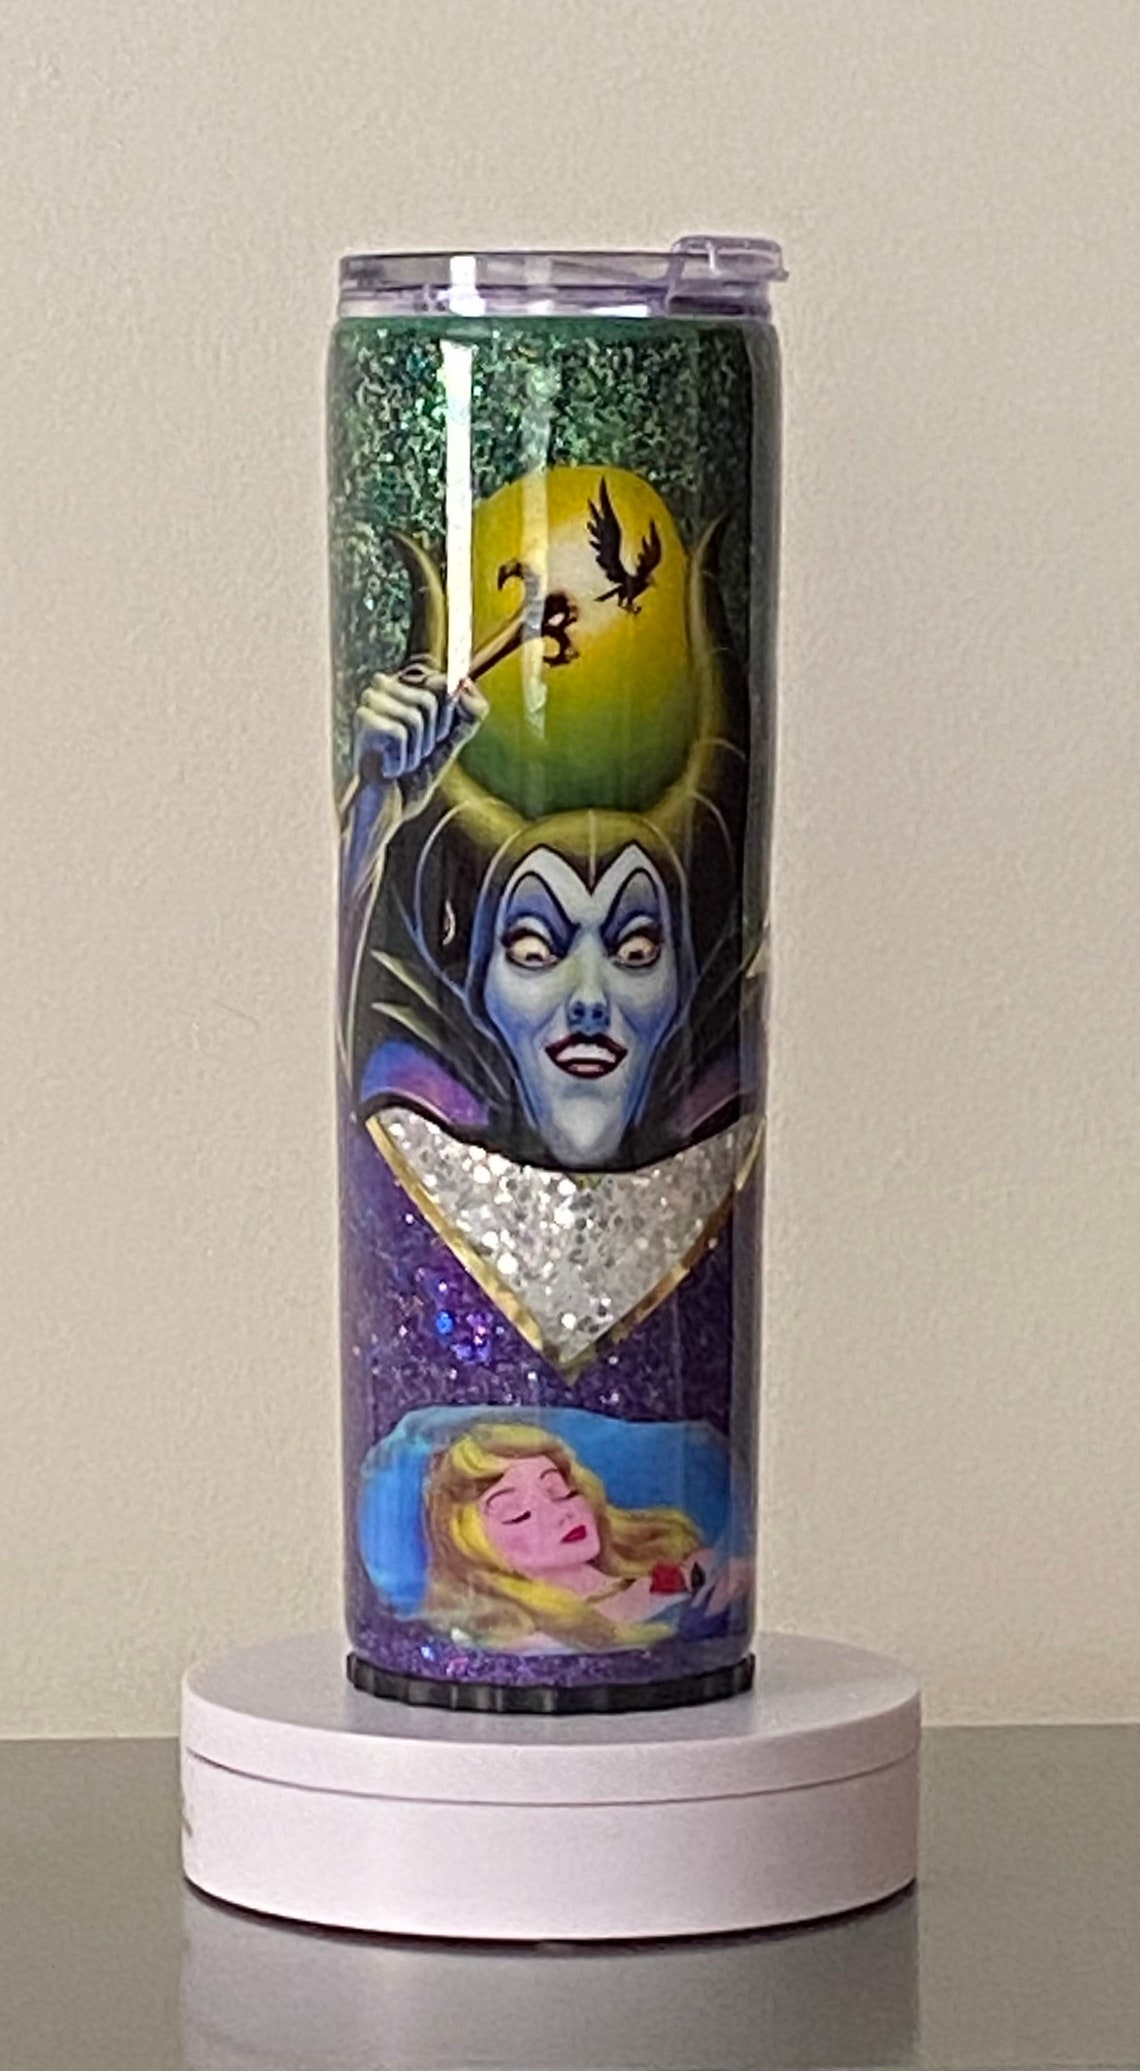 Maleficent Tumbler 30 oz Stainless Steel Insulated | Etsy